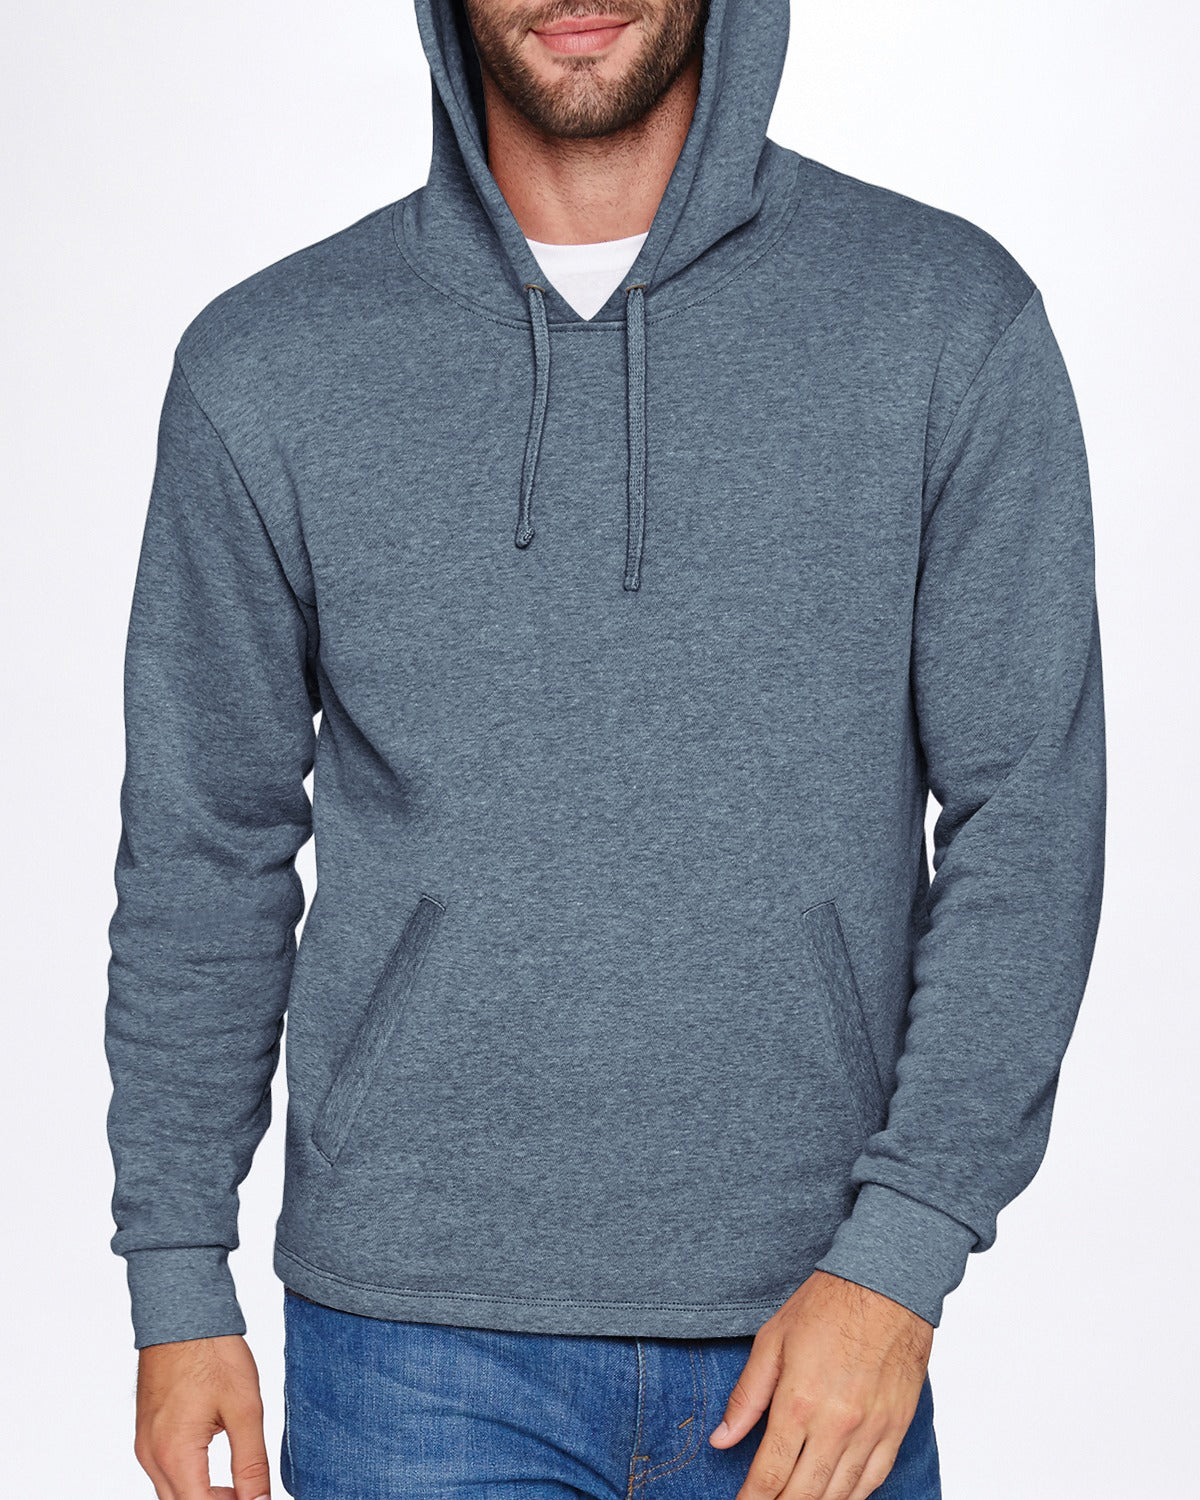 Adult PCH Pullover Hoody